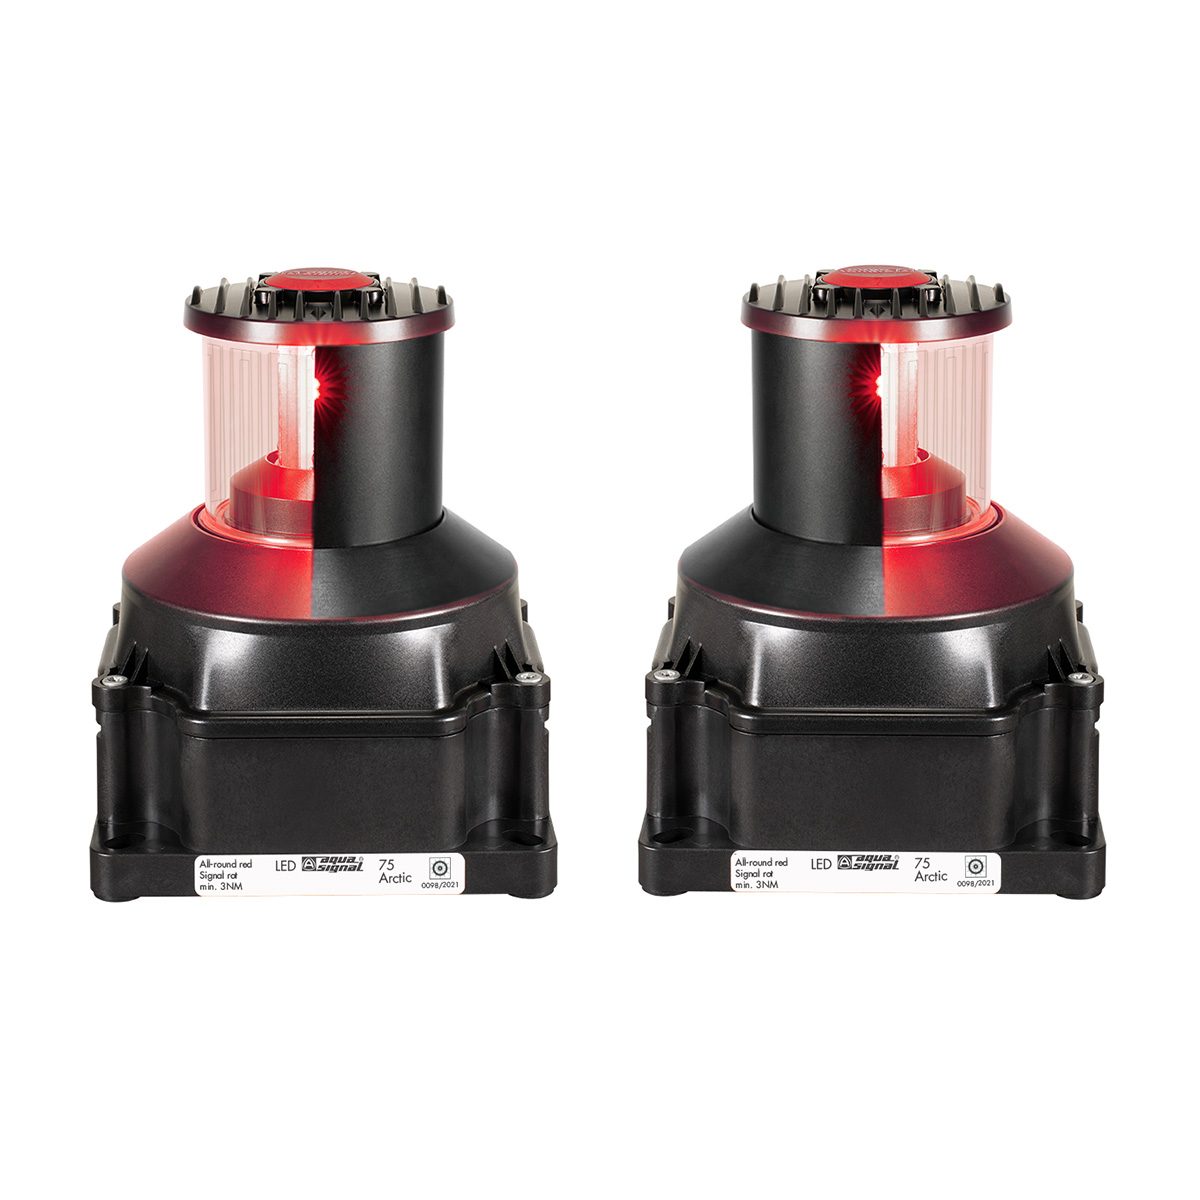 3675206003 75D LED Signal Red, main 115-230VAC/spare 24VDC 180°Starboard 180°Port Black, 3nm